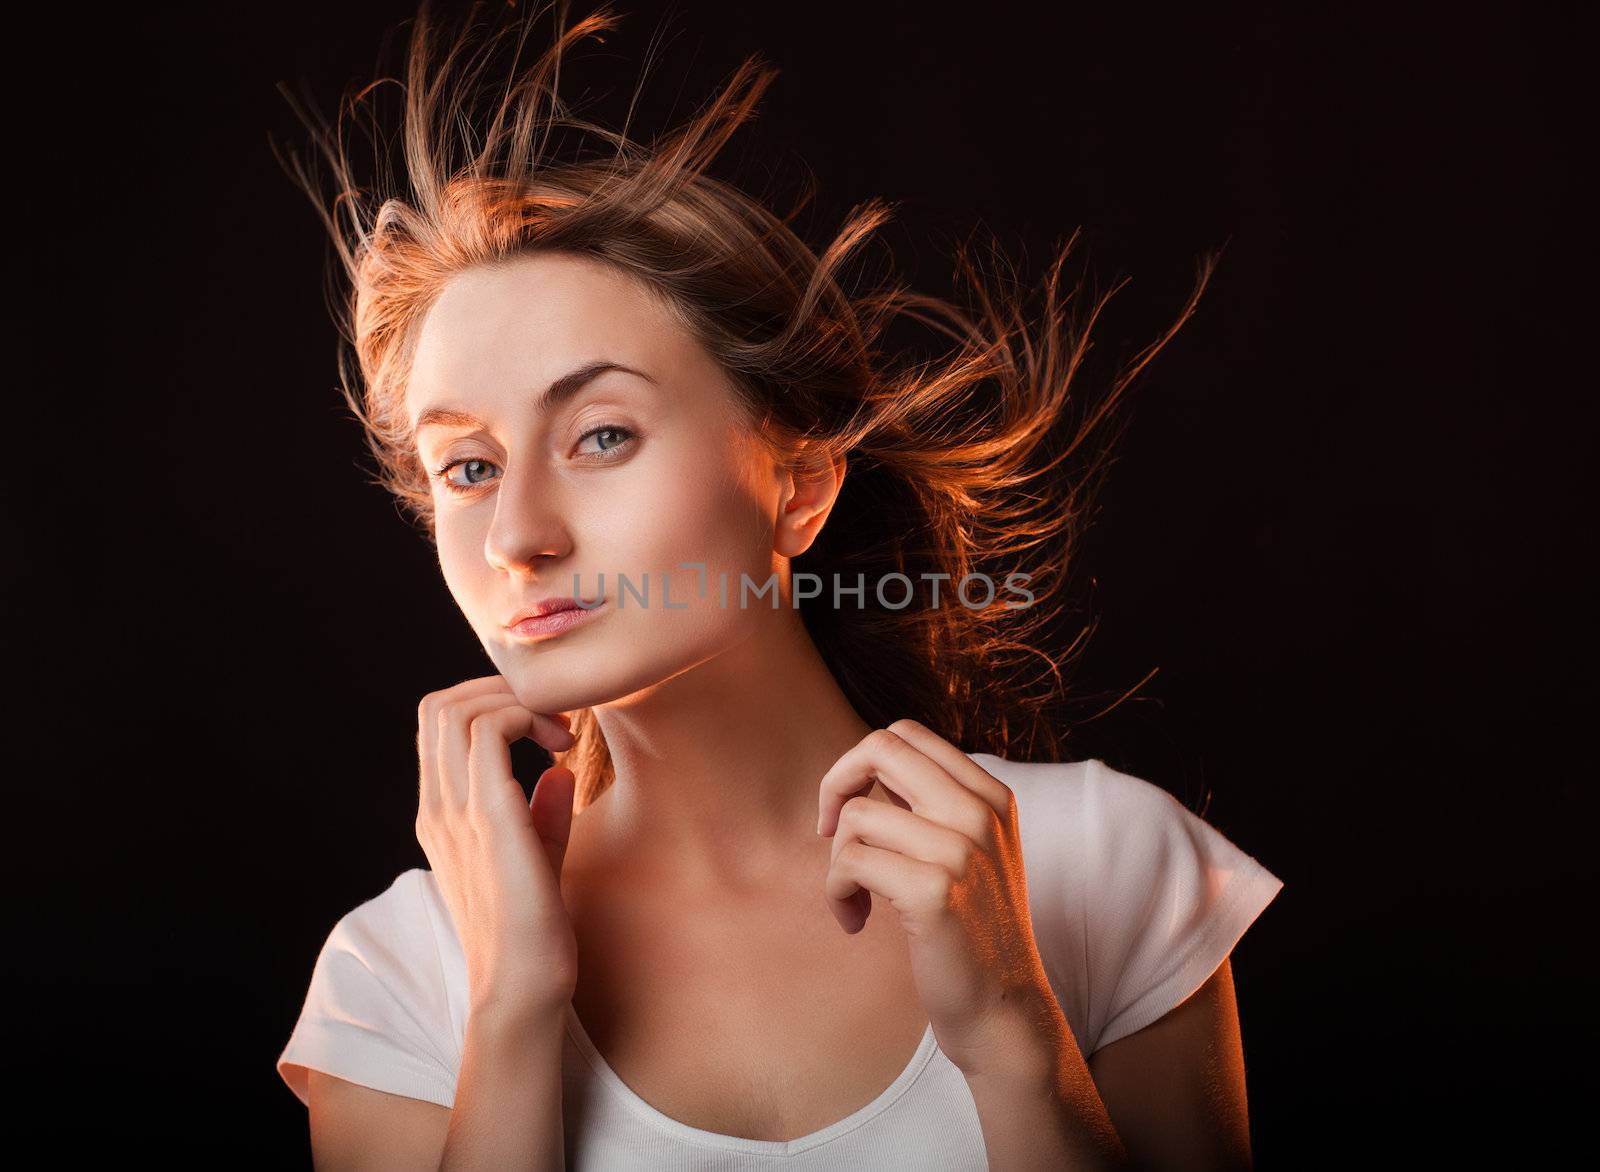 Portrait of a beautiful young woman on a dark background